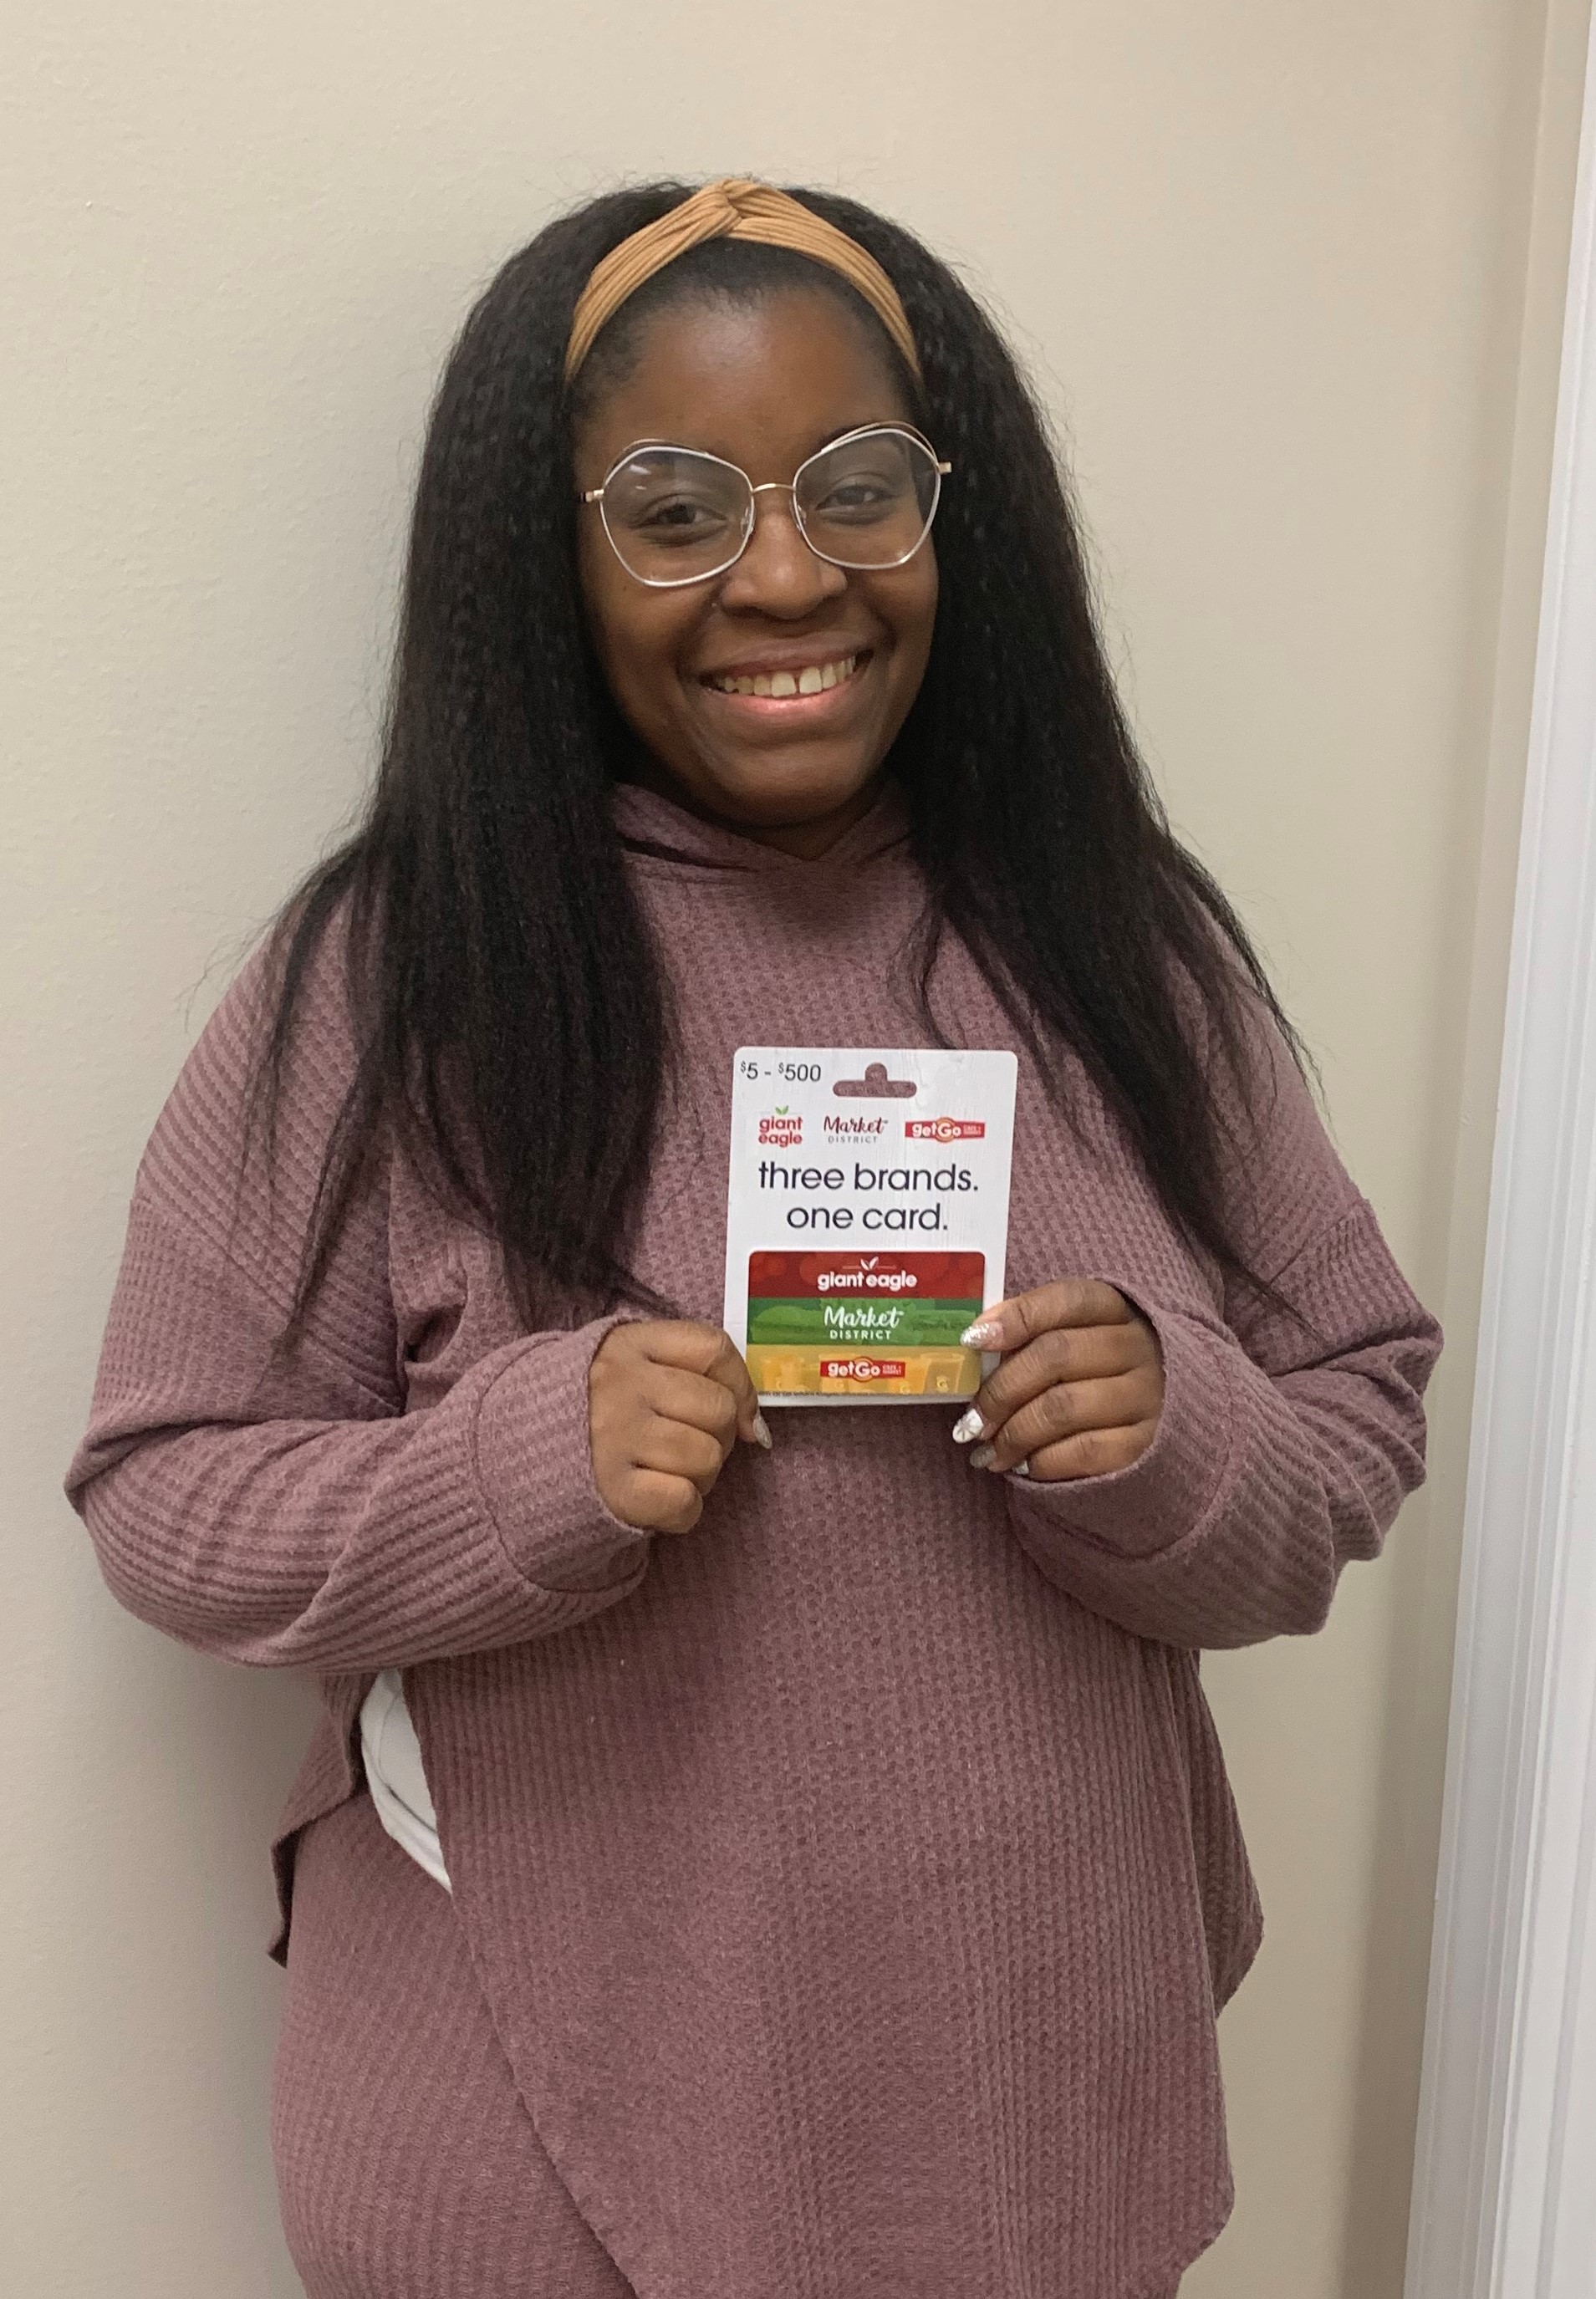 A black woman with glasses and a headband, holding a gift card